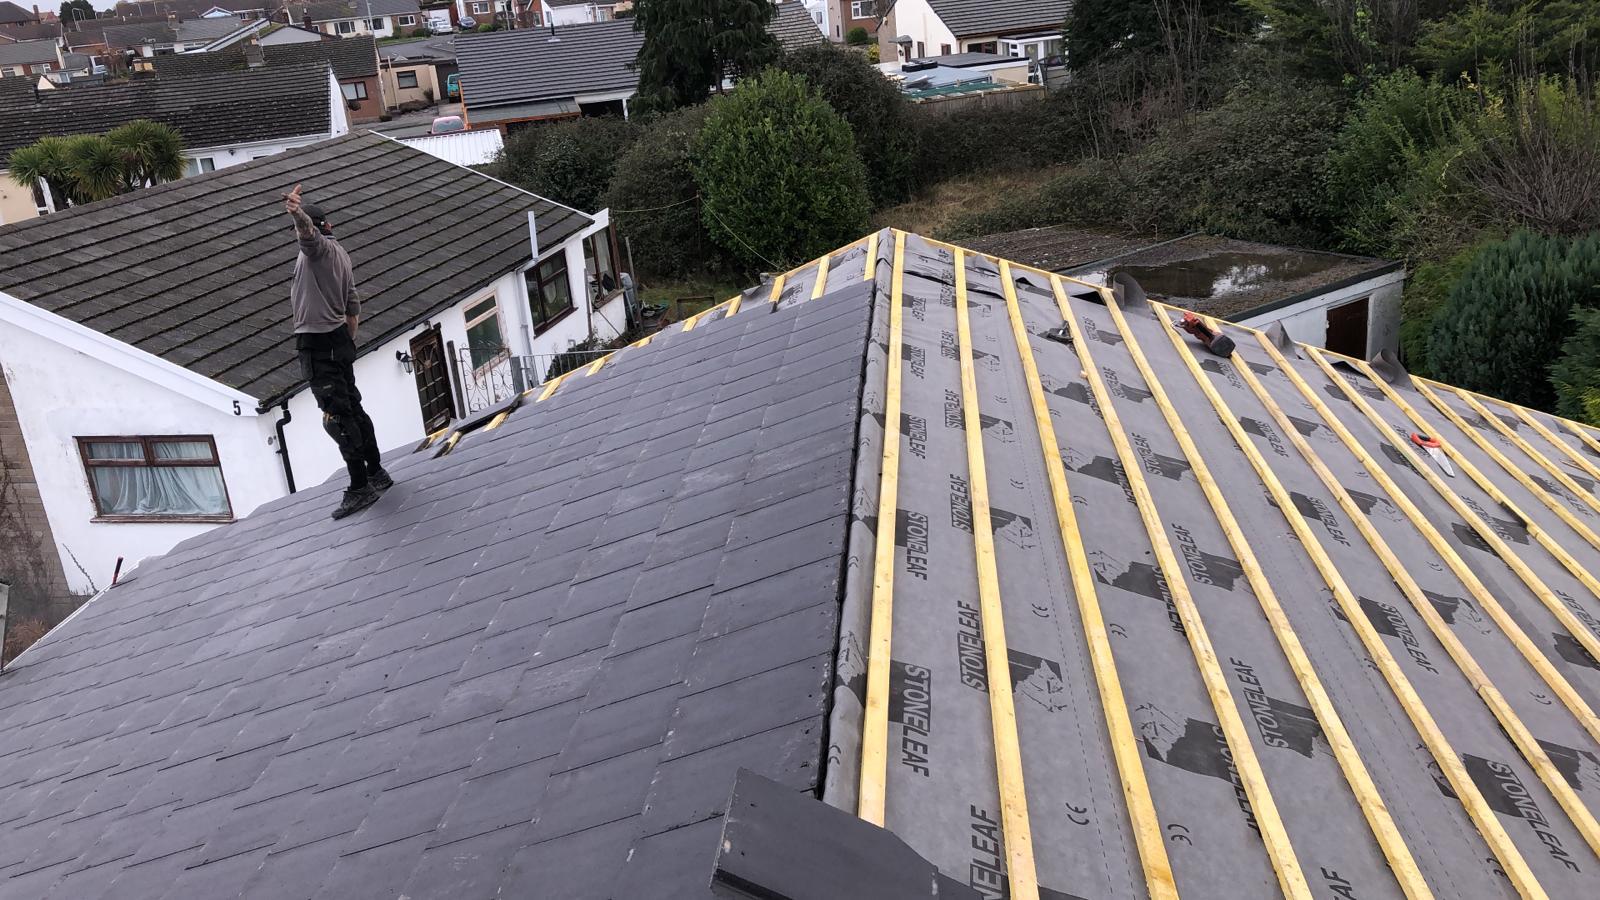 dd-roofing-company-roof-services-contractors-uk-07